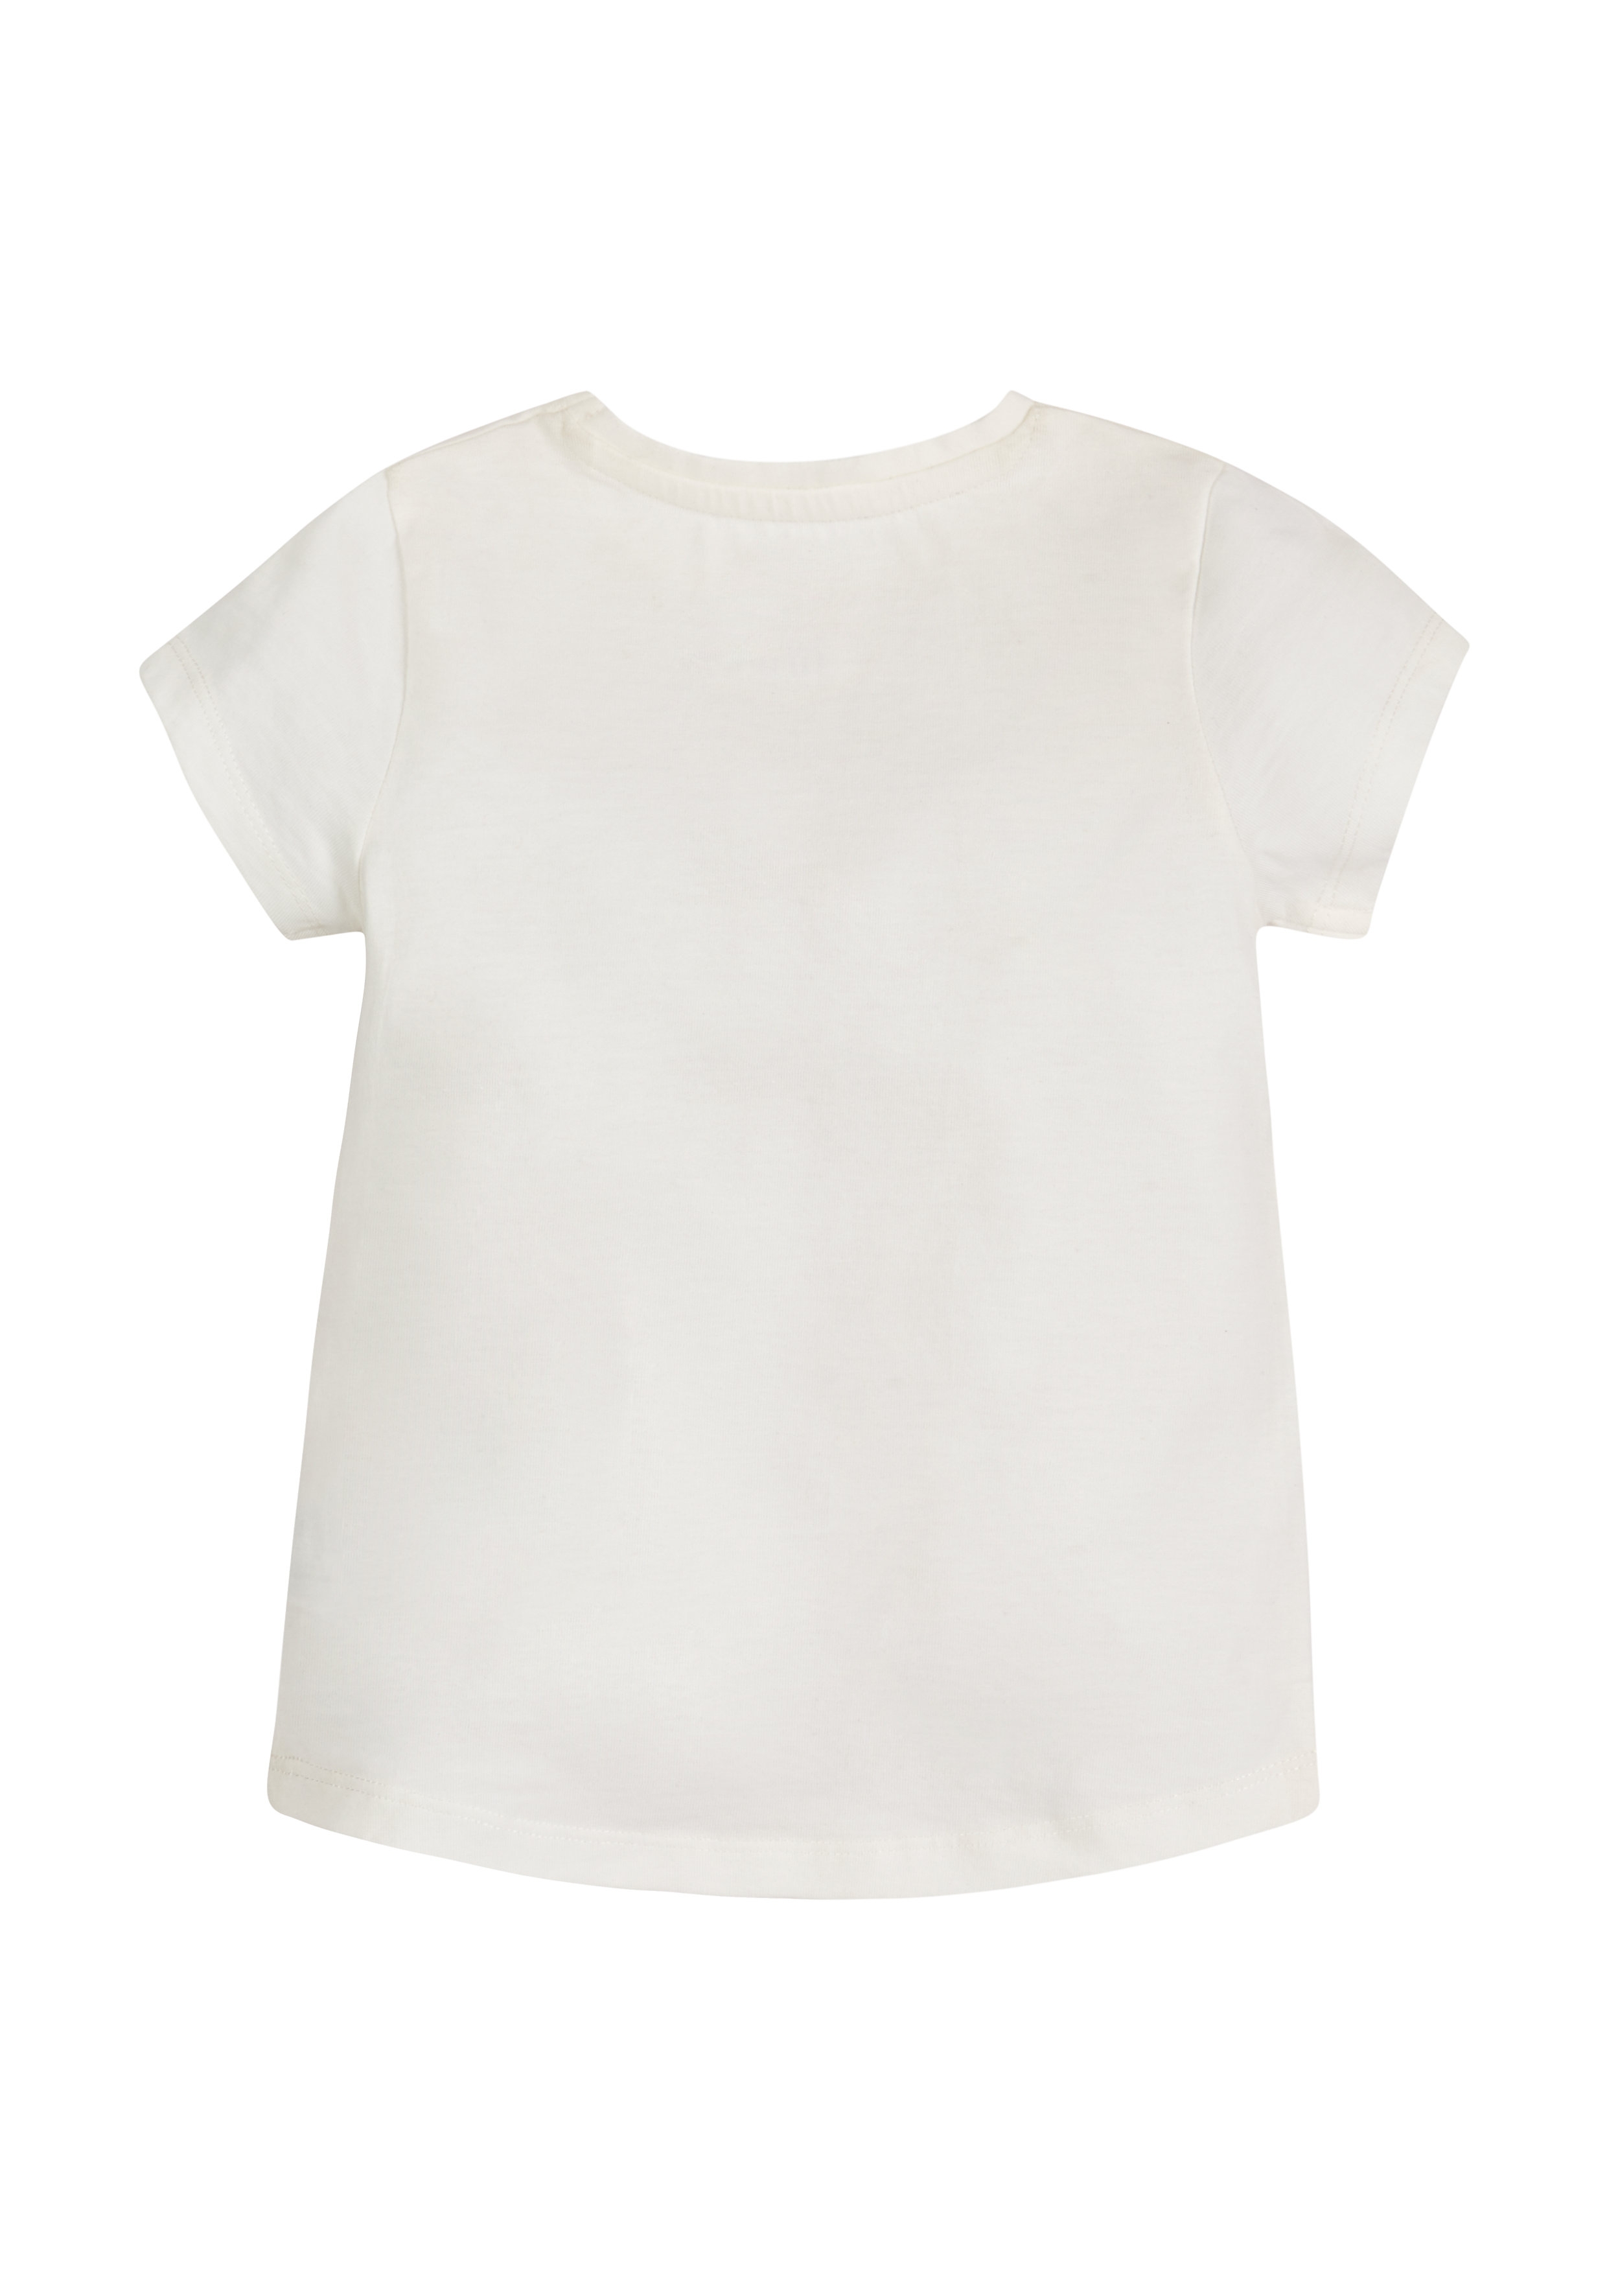 Mothercare | Girls Feather T-Shirt - White 1